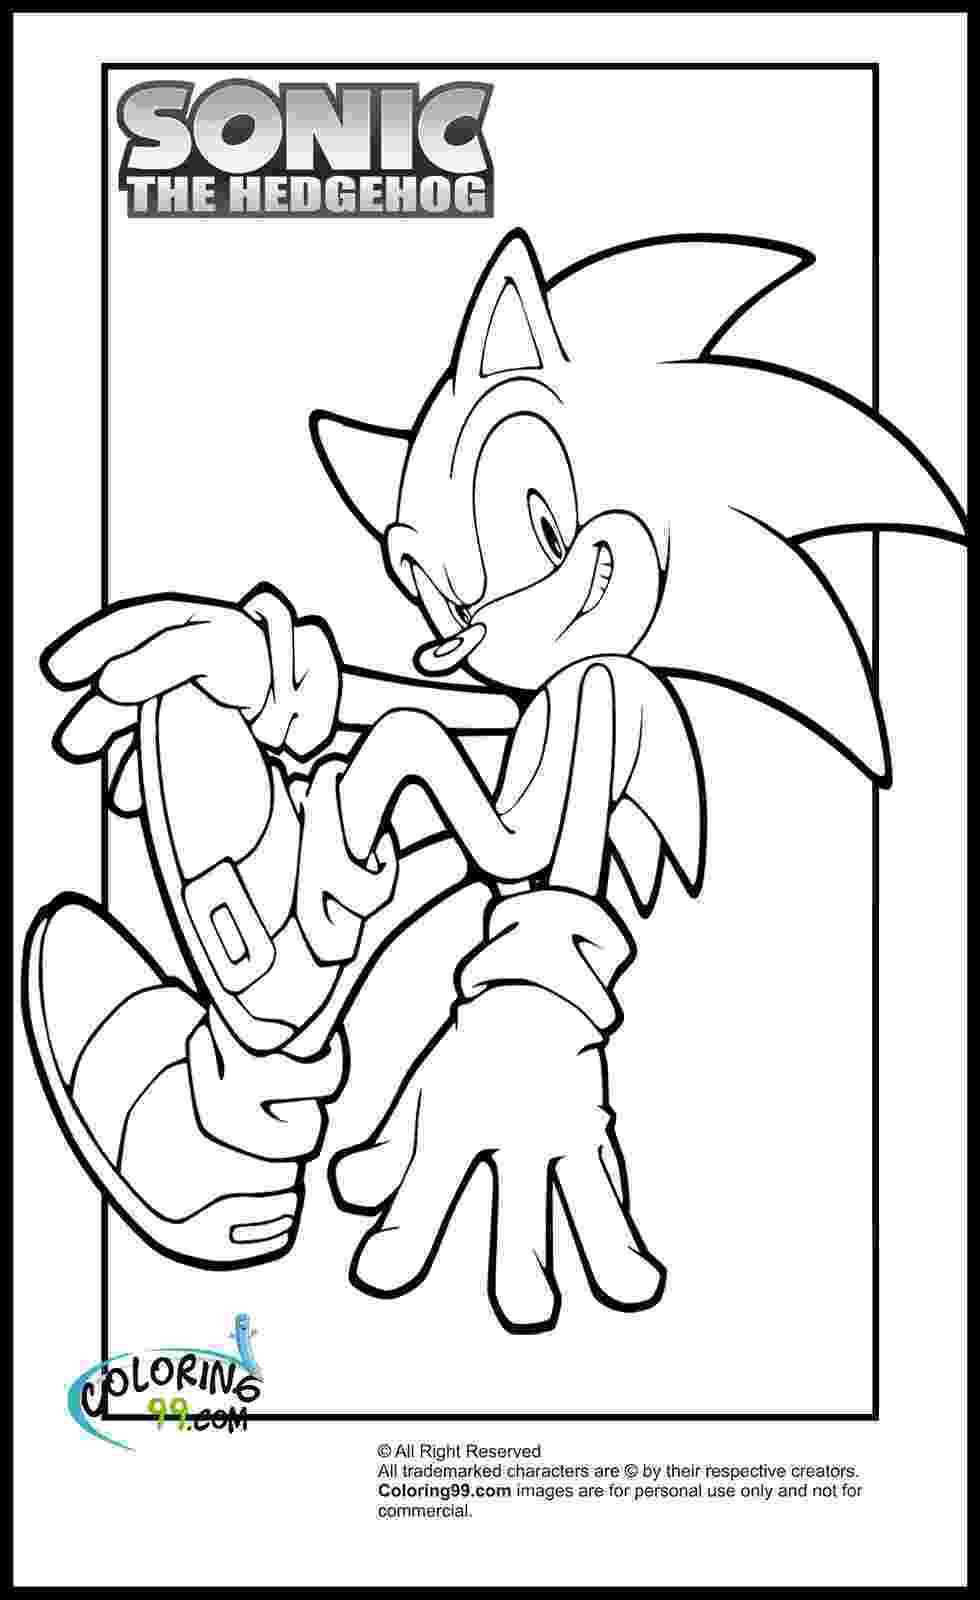 sonic the hedgehog colouring pictures sonic coloring pages team colors sonic the hedgehog colouring pictures 